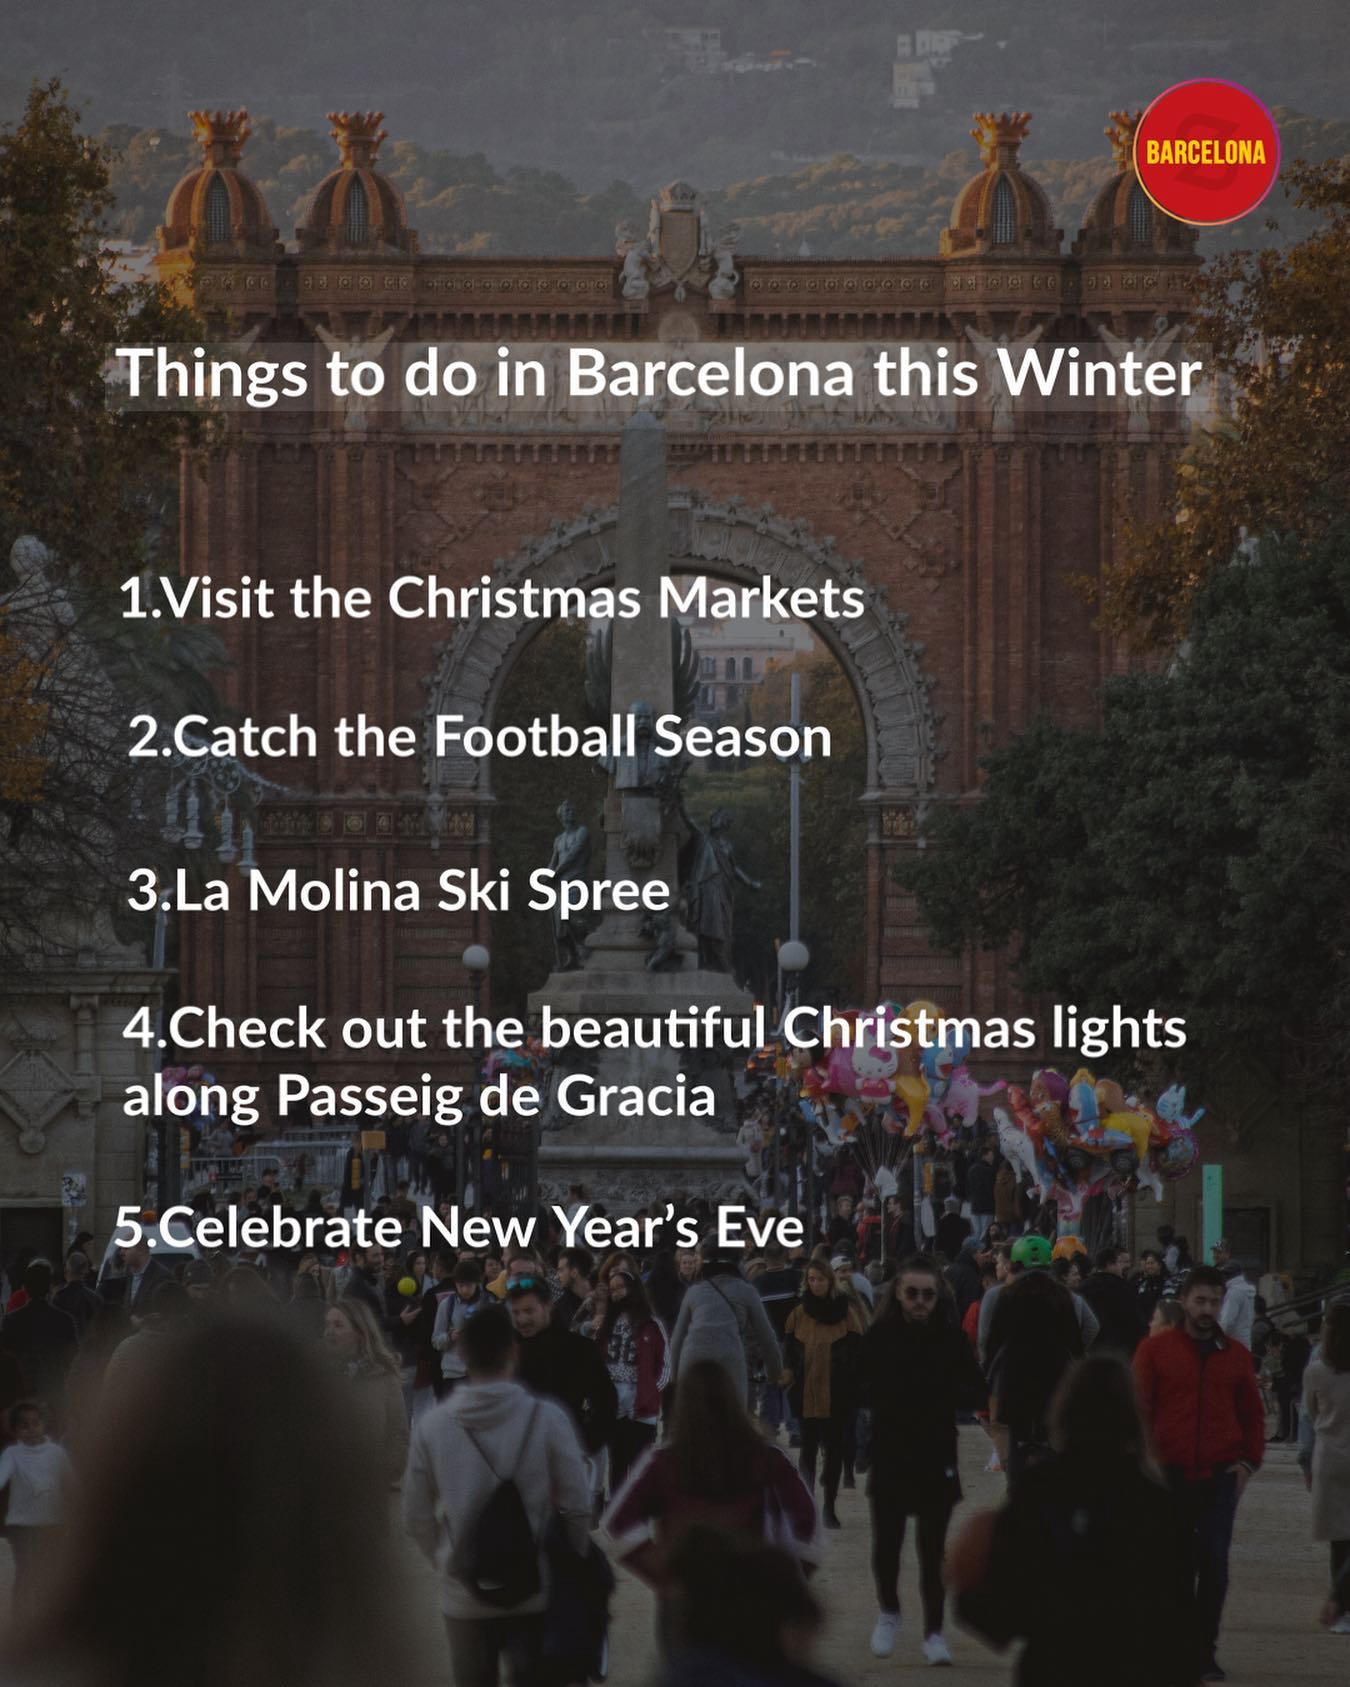 Barcelona Spain 🇪🇸 Travel | Hotels | Food | Tips - Don't miss the best deals of the season